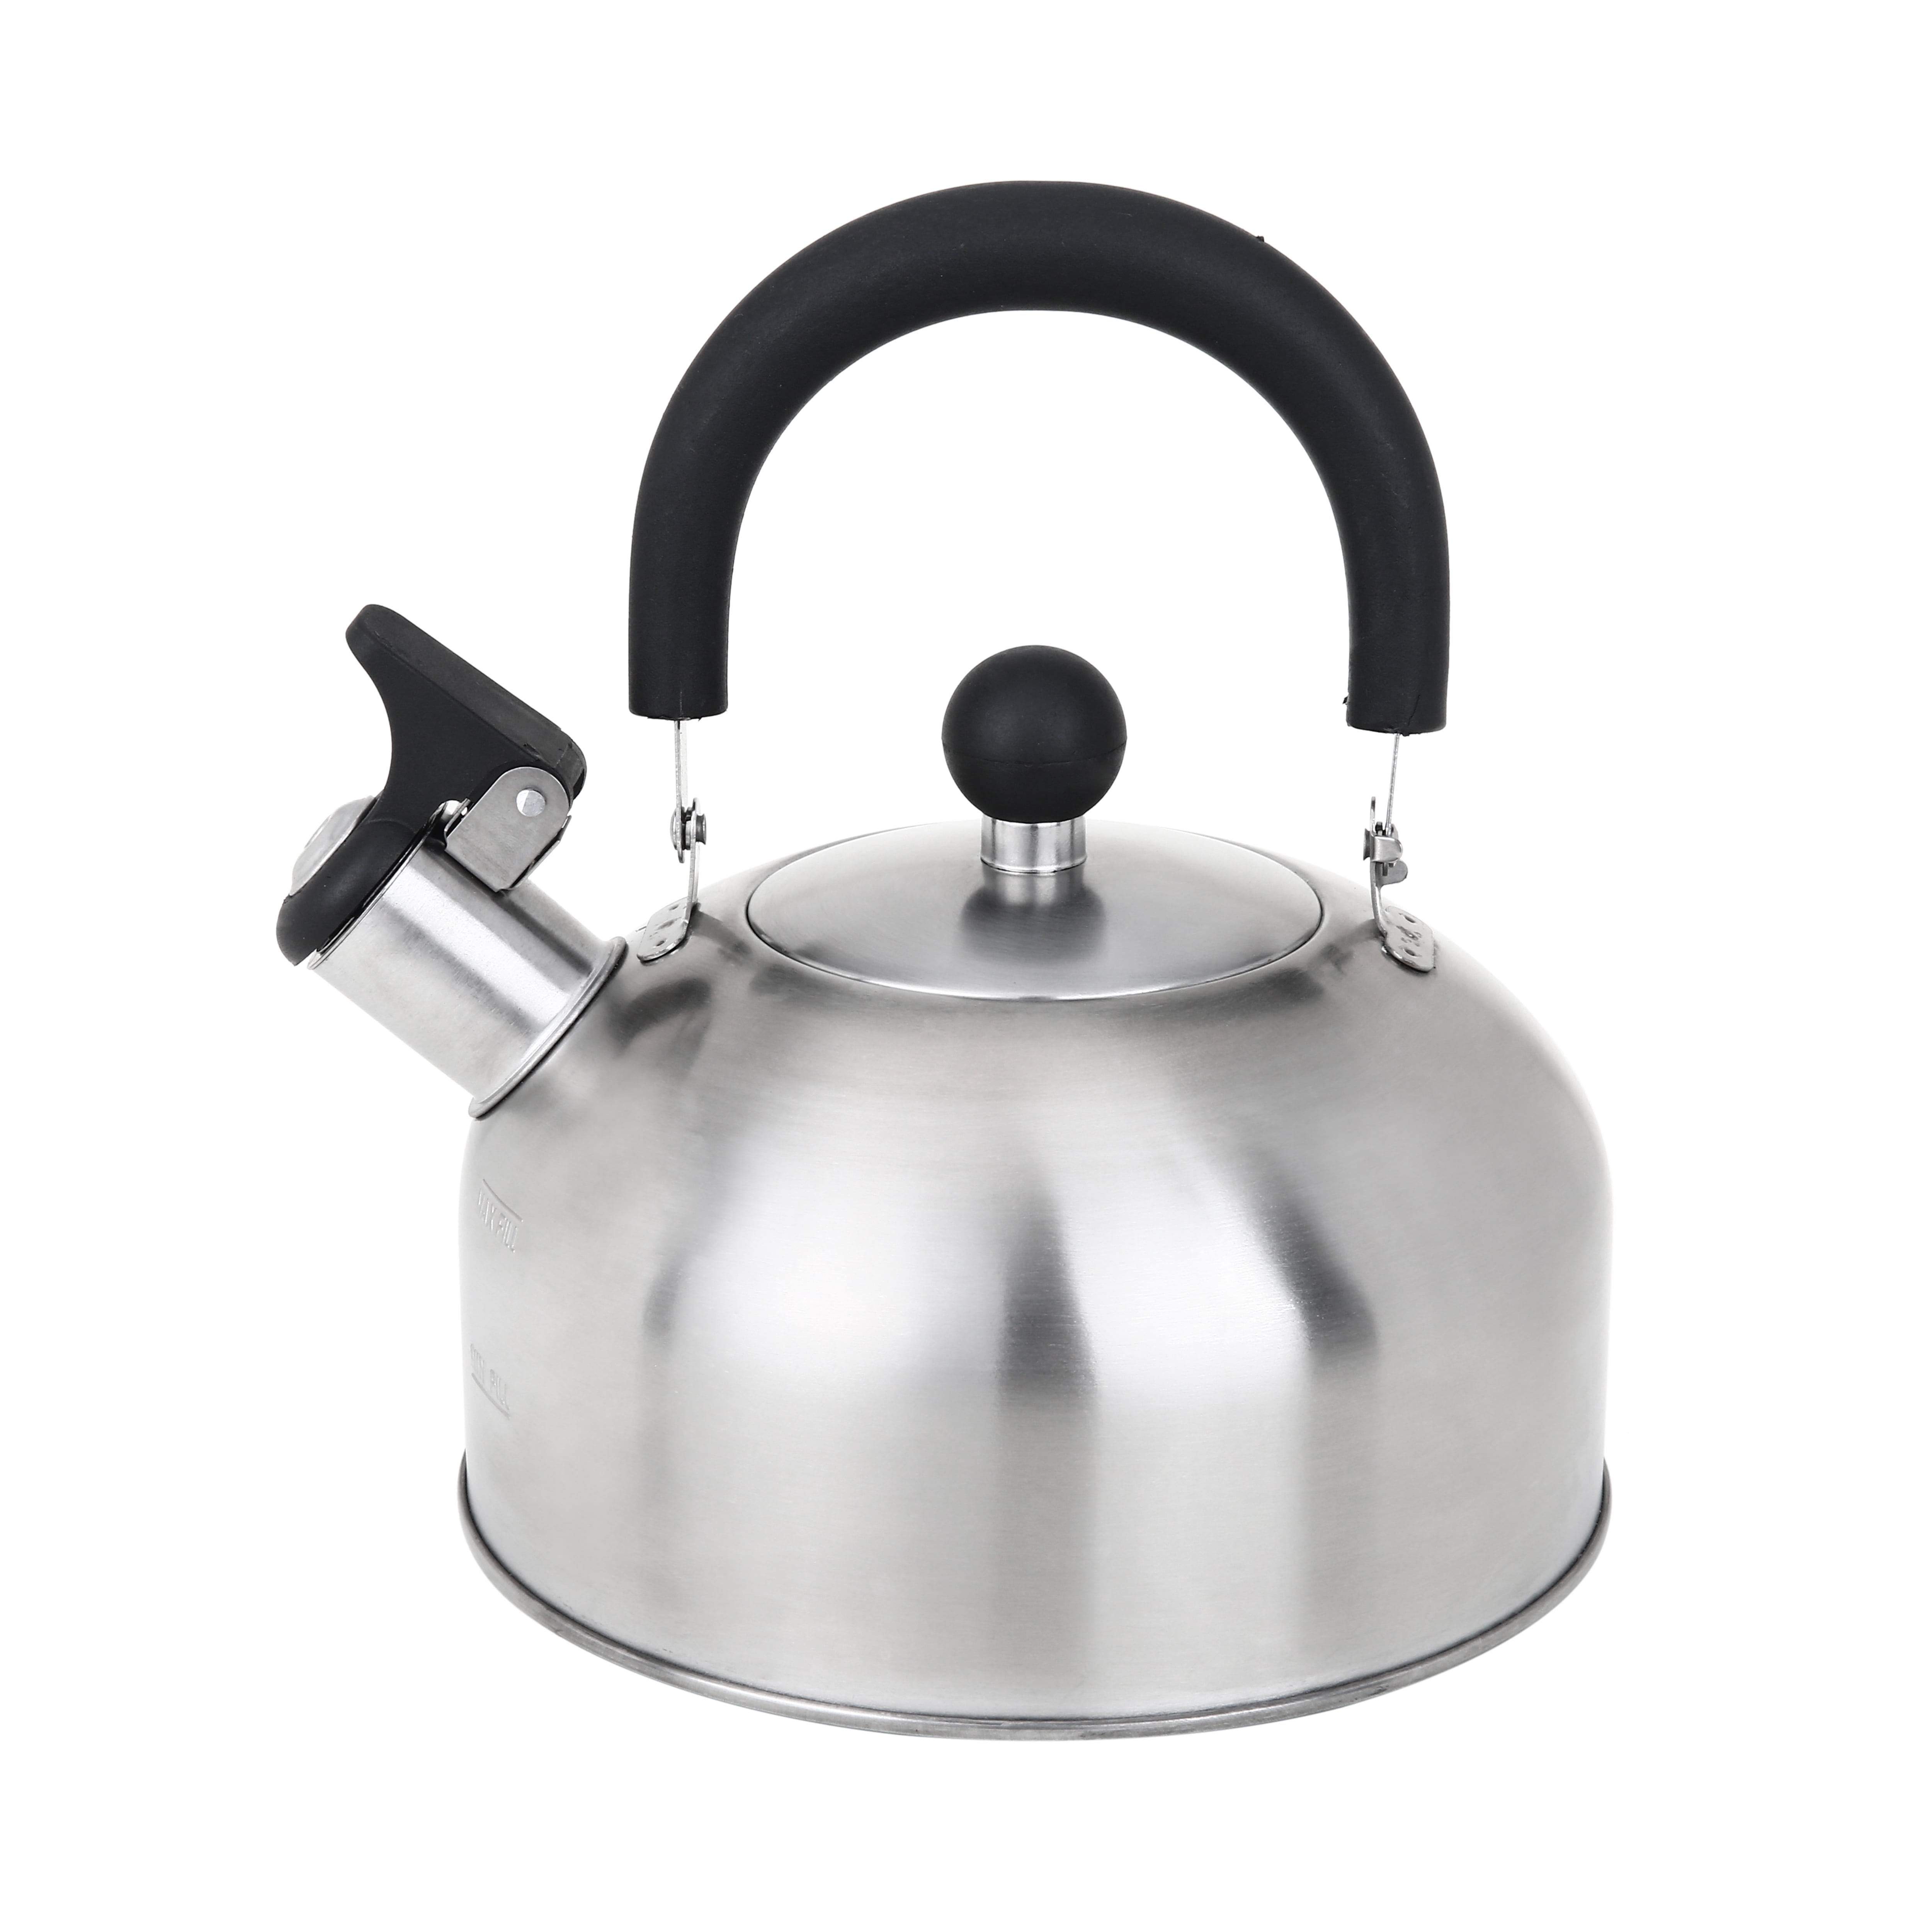 Stainless Steel Stovetop Whistling Tea Kettle 3 Liter (3-Quart) Classic  Teapot with Ergonomic Handle, Works on Induction Cooktops-Red 2408